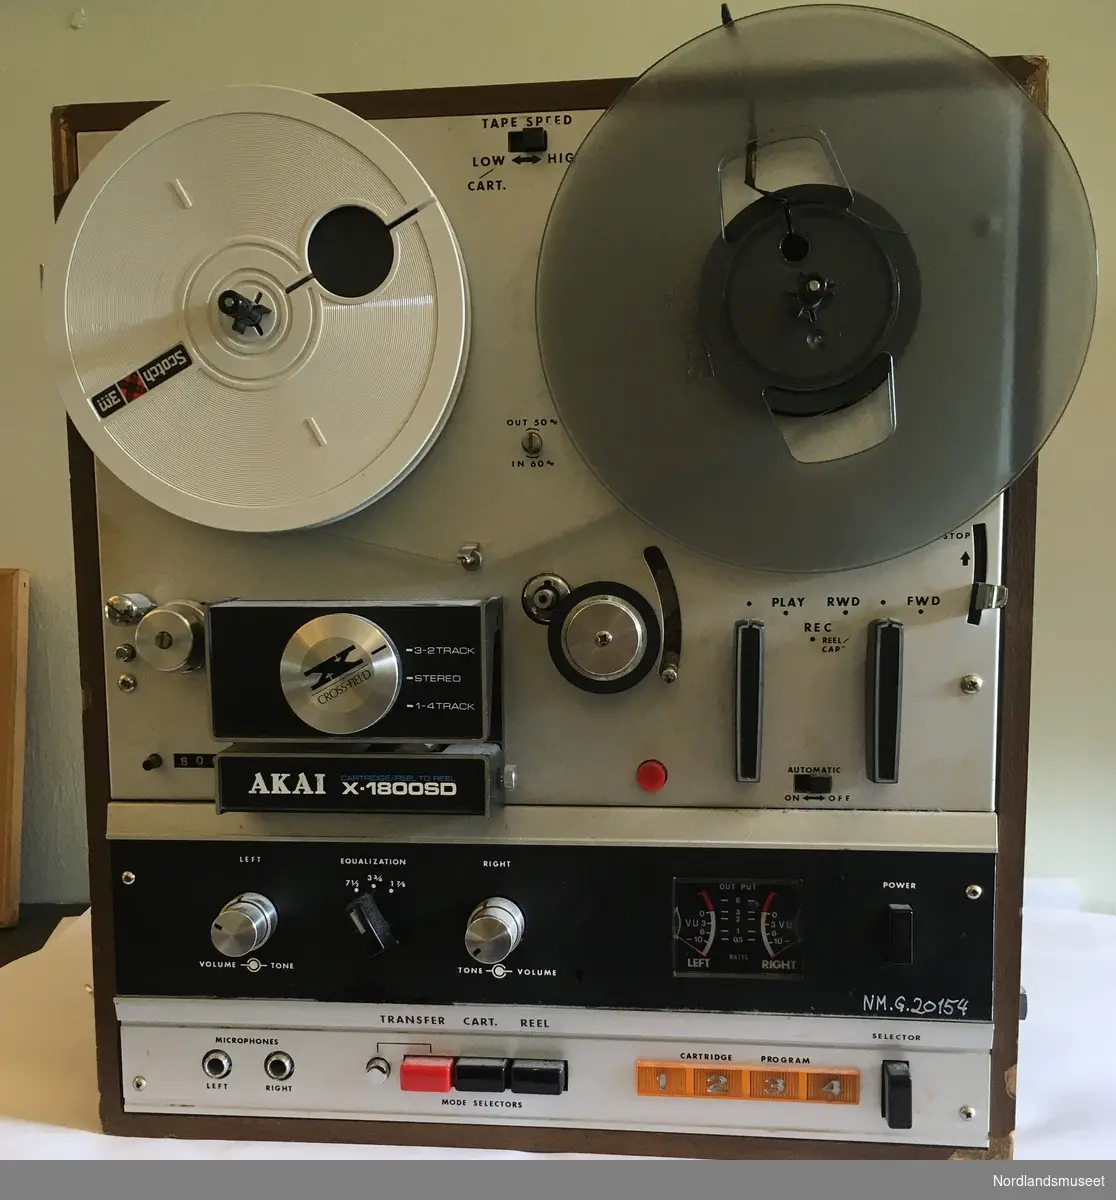 Multi-purpose tape recorder
4 track stereo/mono reel to reel
8 track stereo cartridge
Transfer from reel to cartridge
CROSS FIELD SUPER DELUXE 
s.n B-61211-01470